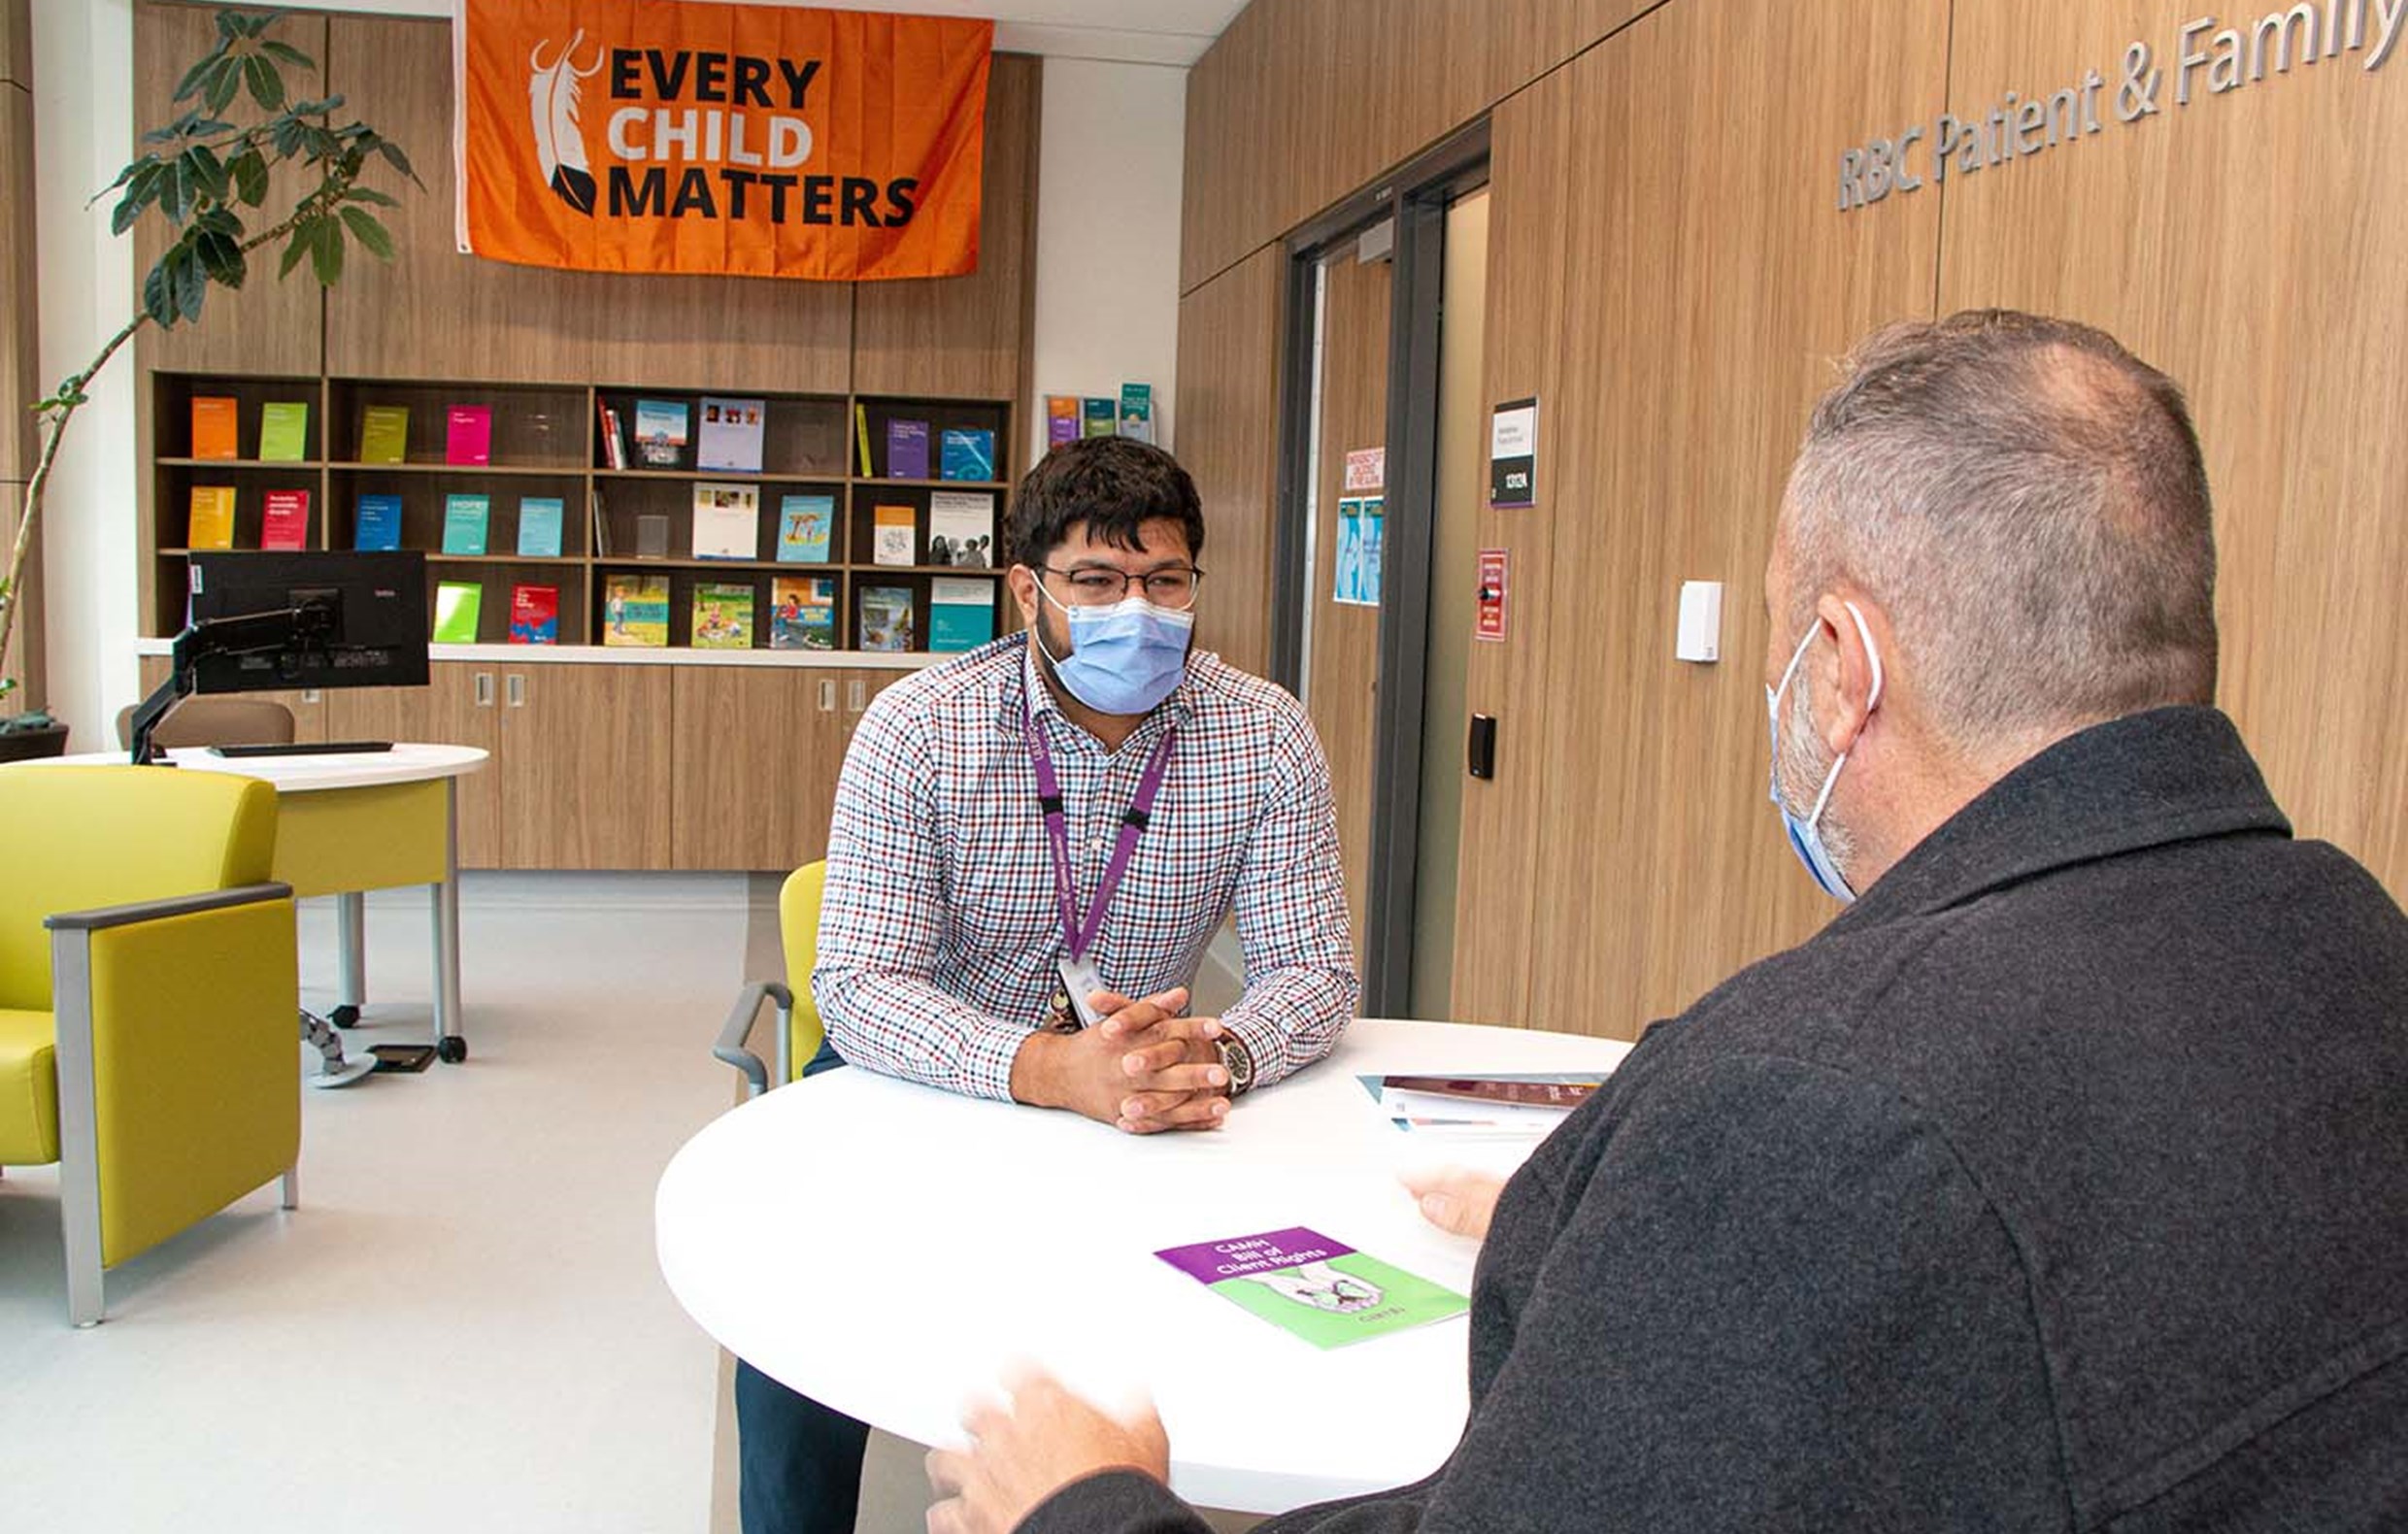 CAMH staff talking to a person at a table